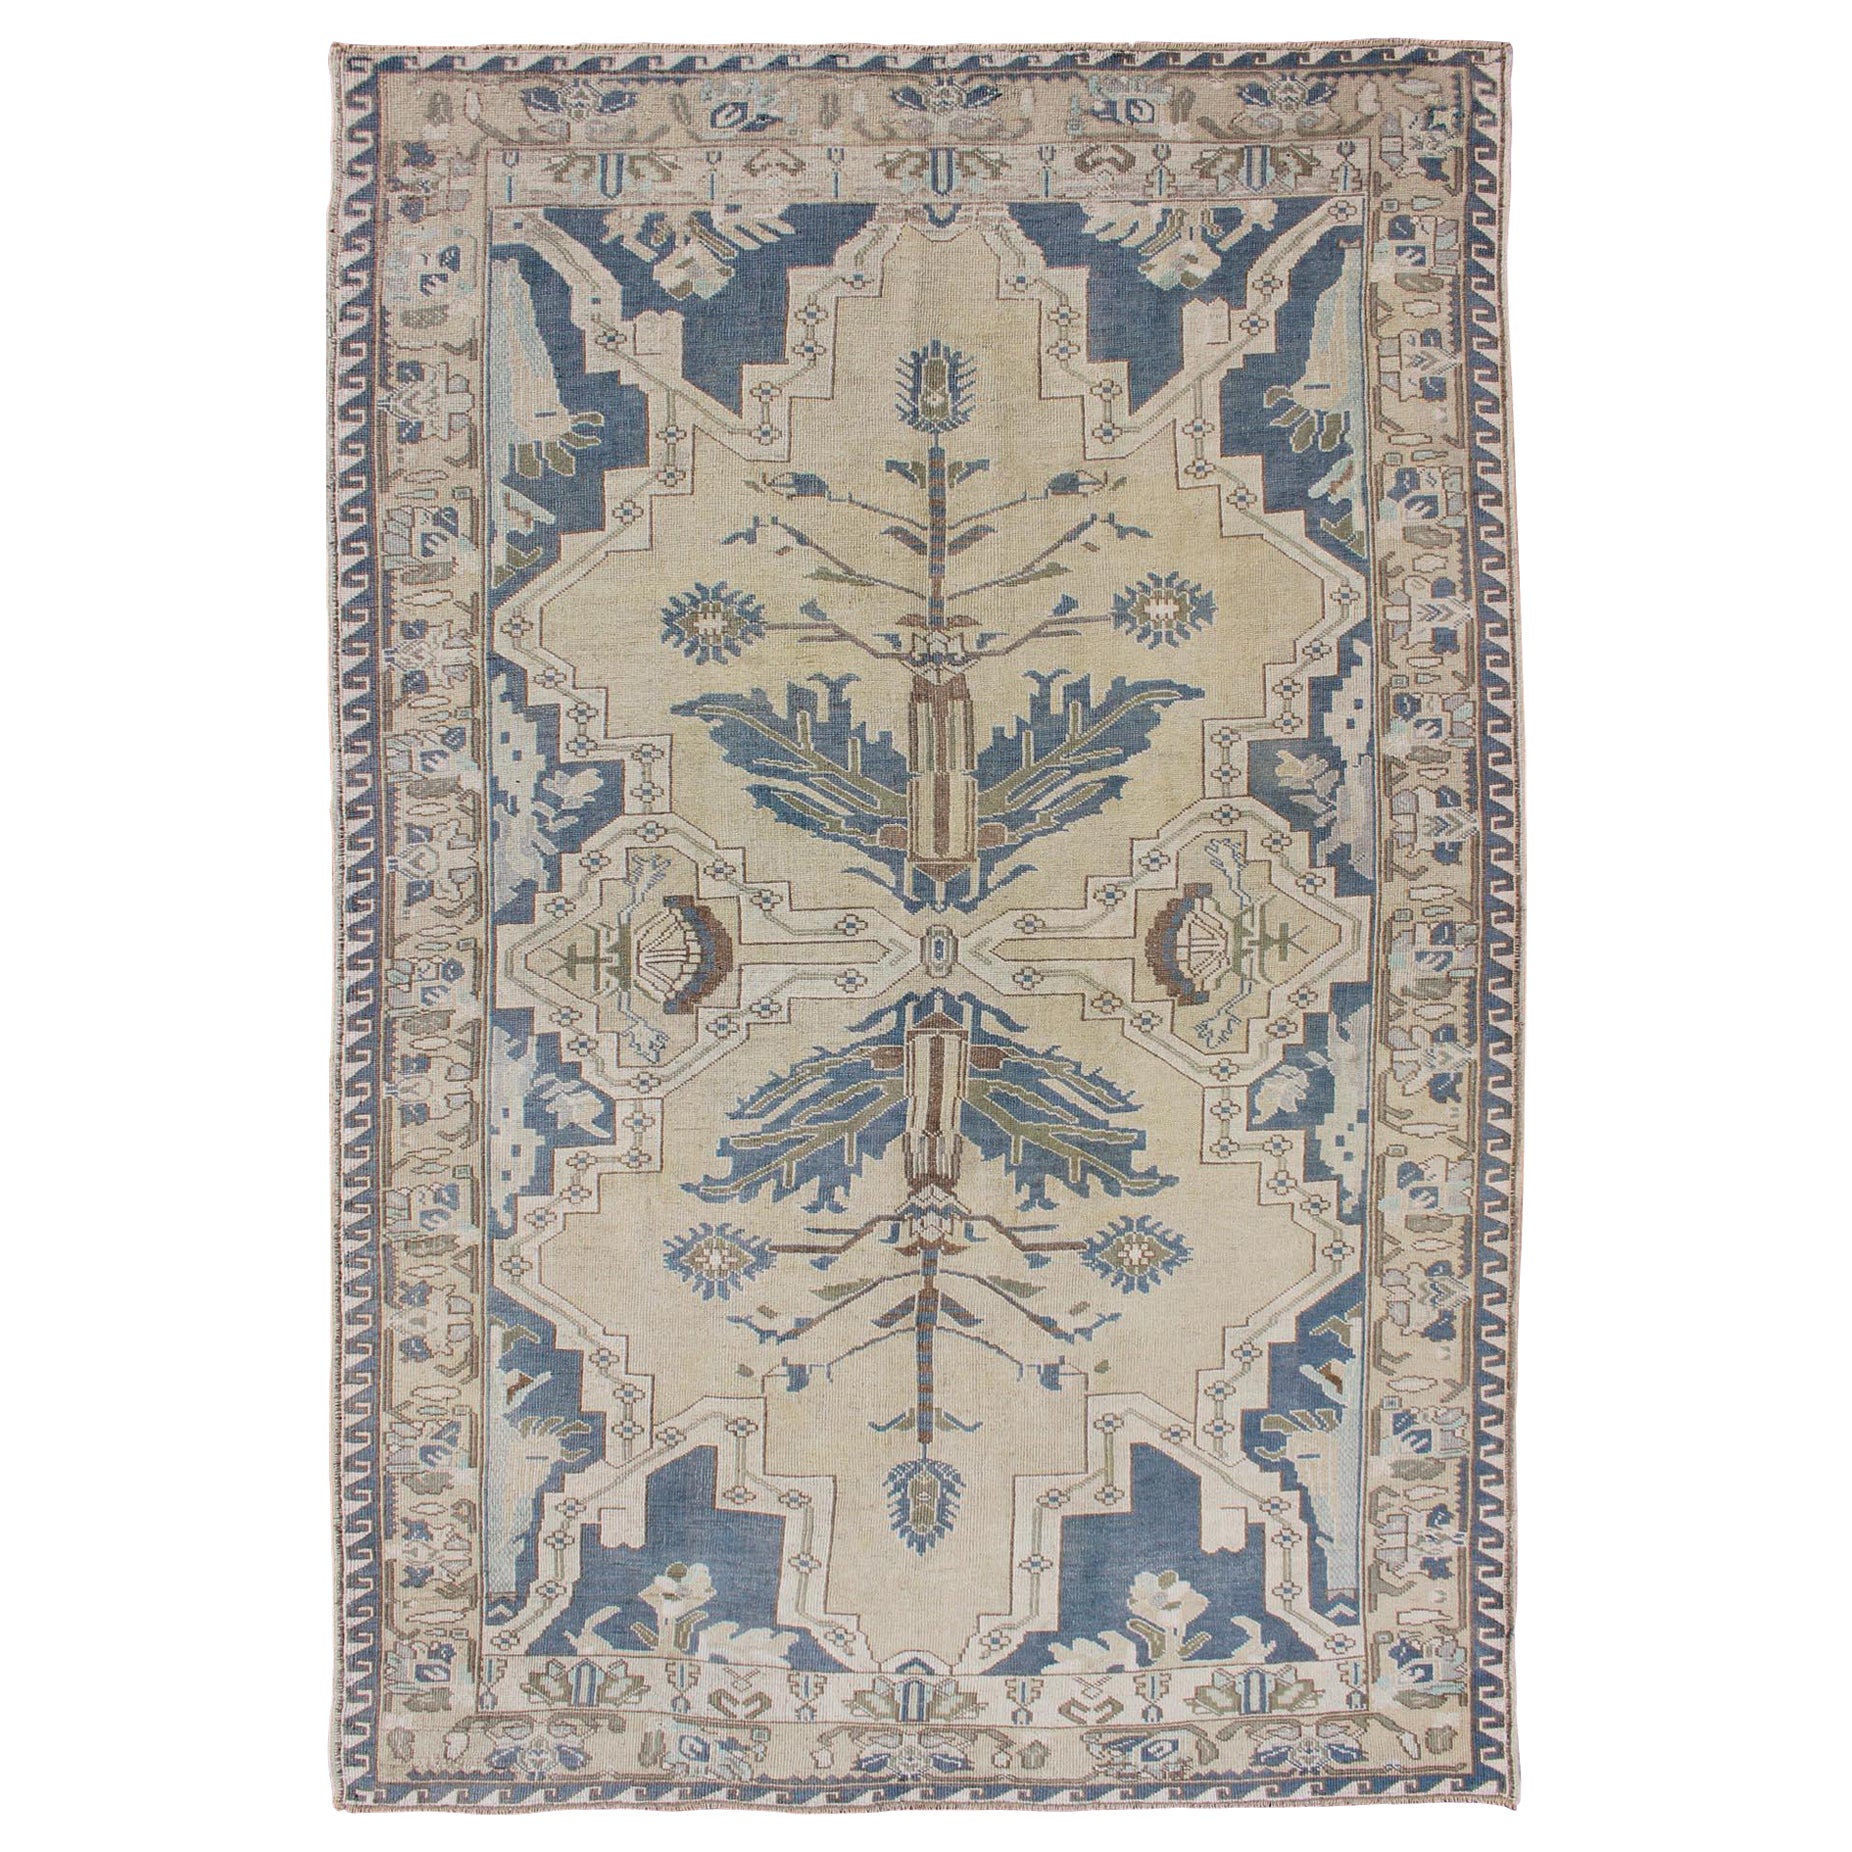 Vintage Turkish Rug with Unique Design in Blue, Taupe, Butter & Neutral Colors